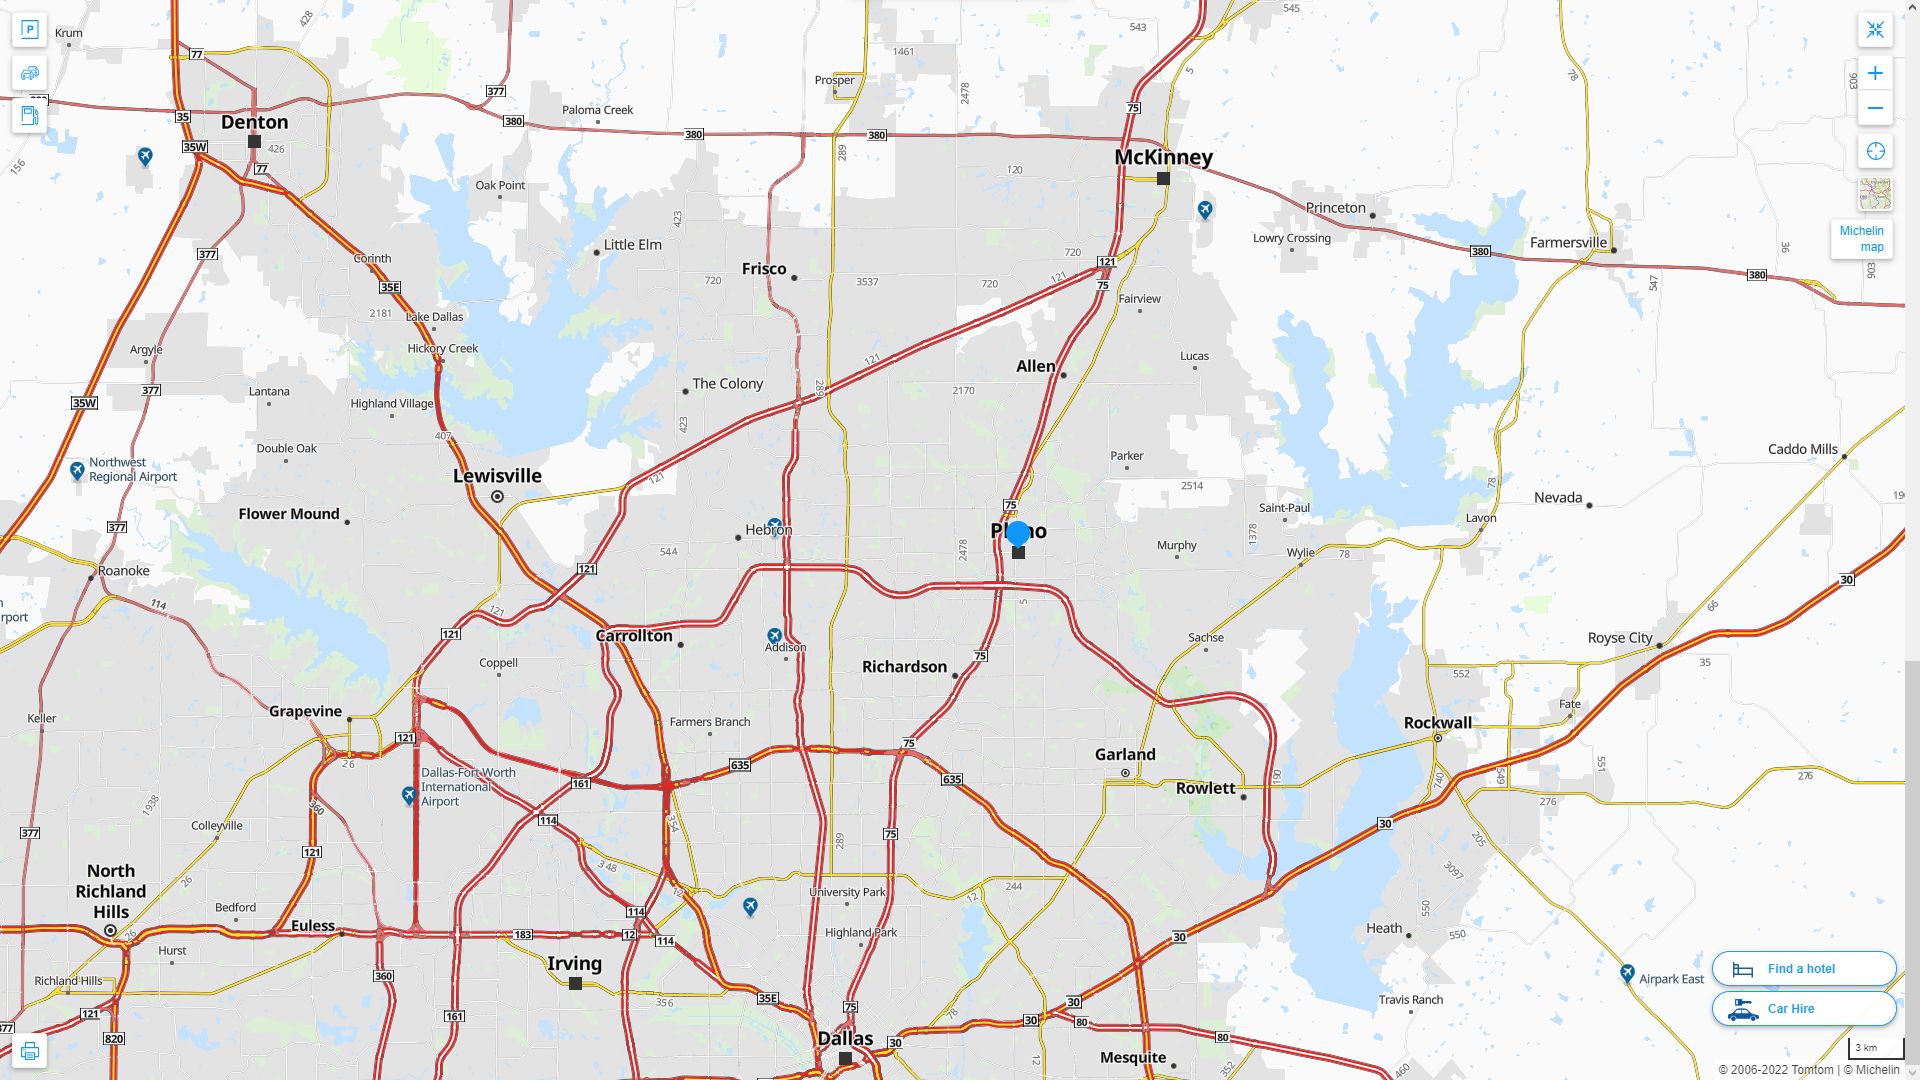 Plano Texas Highway and Road Map